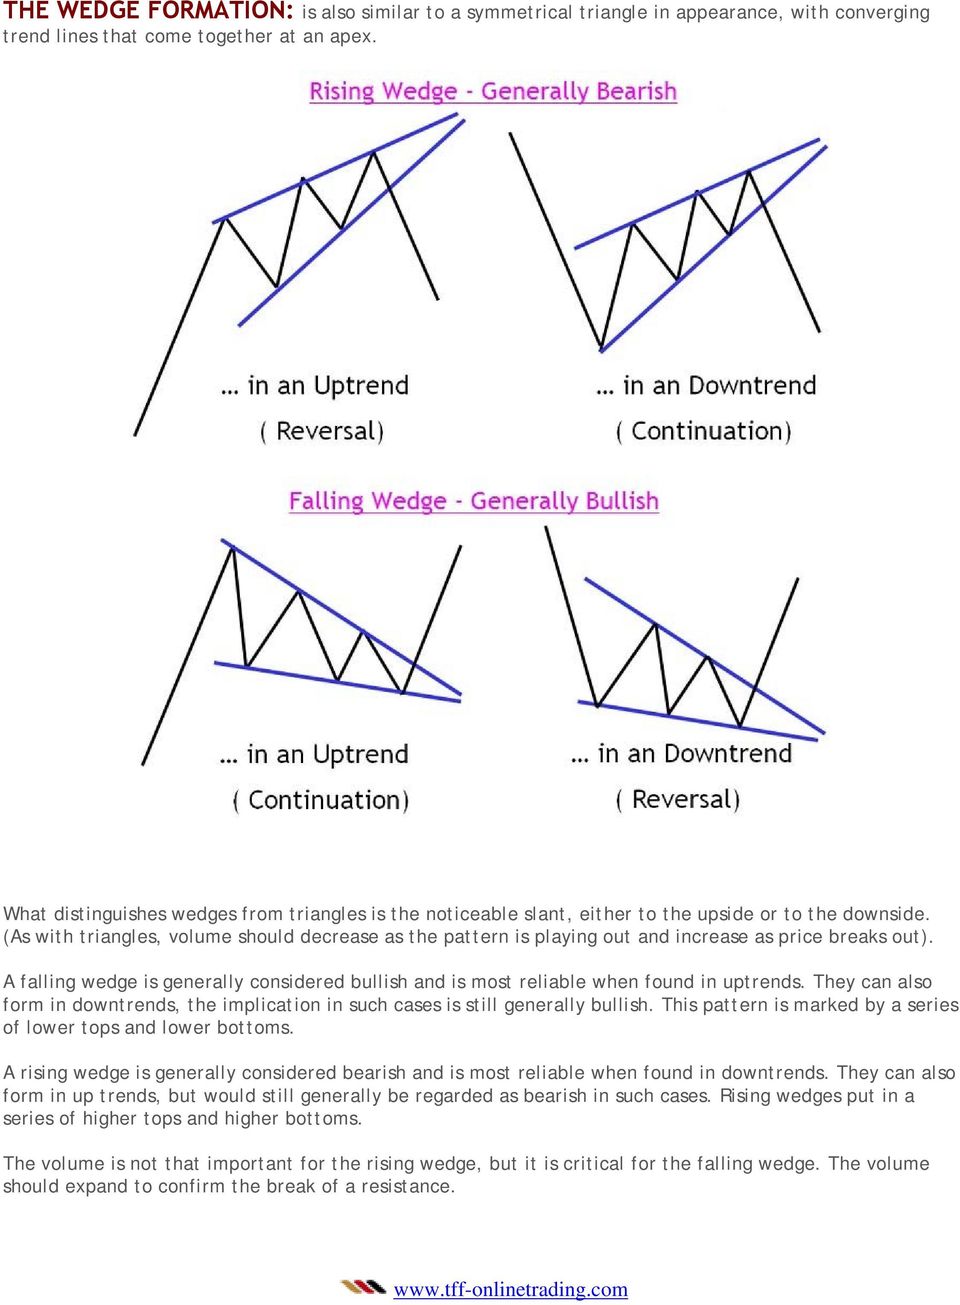 (As with triangles, volume should decrease as the pattern is playing out and increase as price breaks out). A falling wedge is generally considered bullish and is most reliable when found in uptrends.